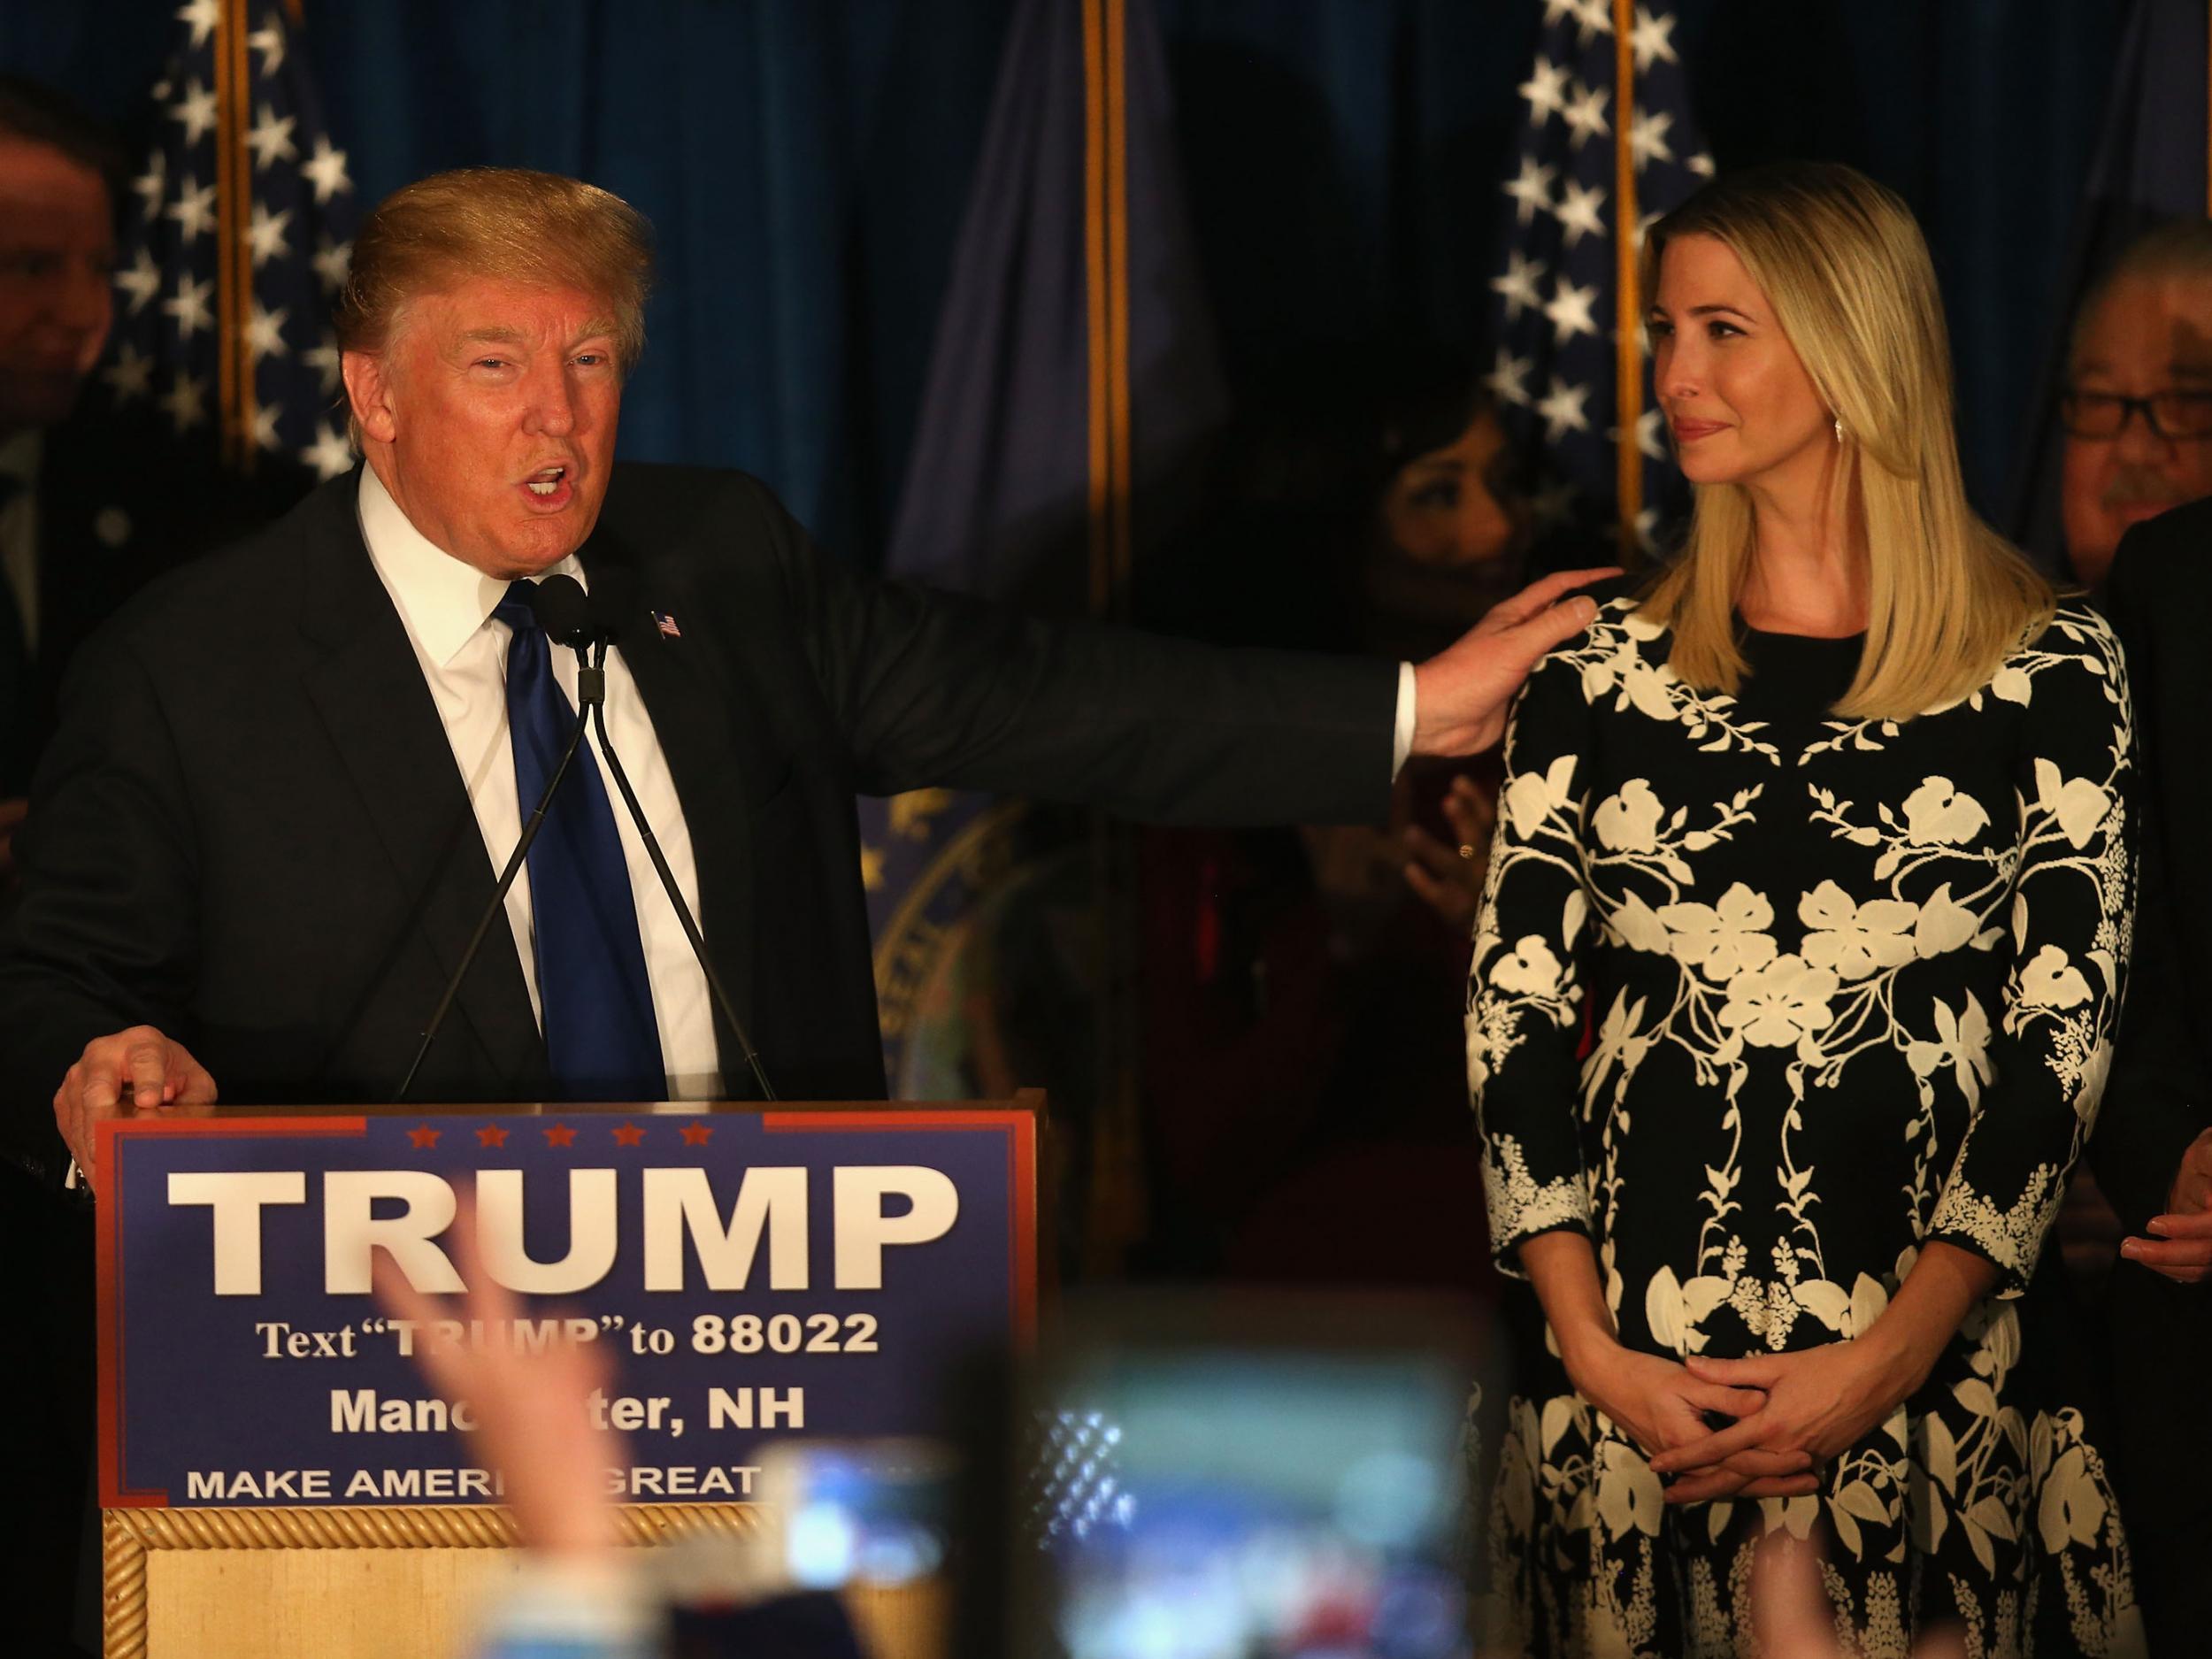 Trump and daughter Ivanka at the New Hampshire Primary